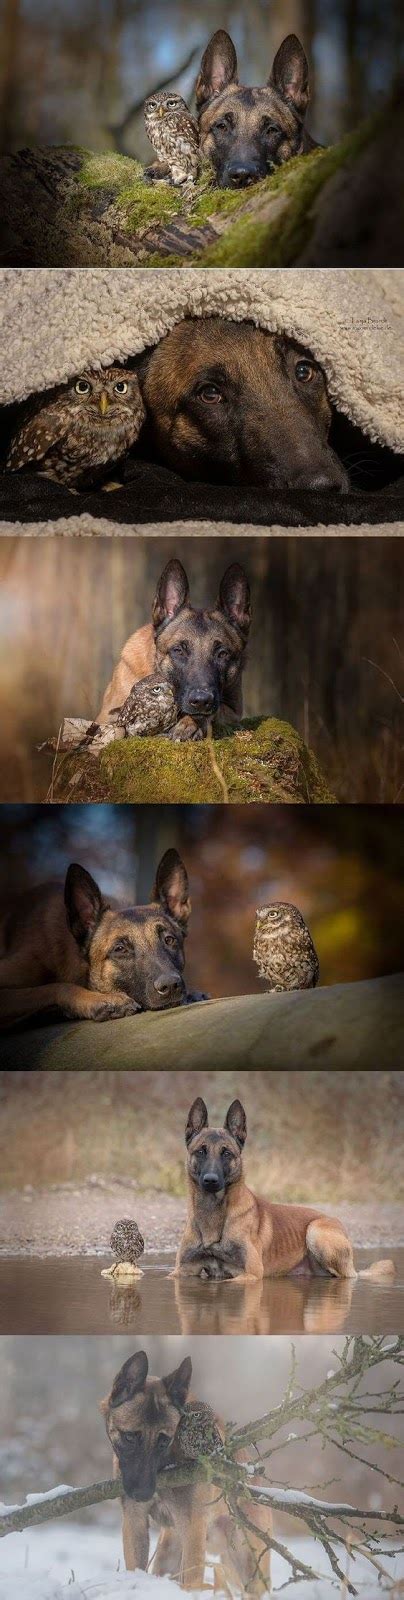 The Unlikely Friendship Of A Dog And An Owl Animals